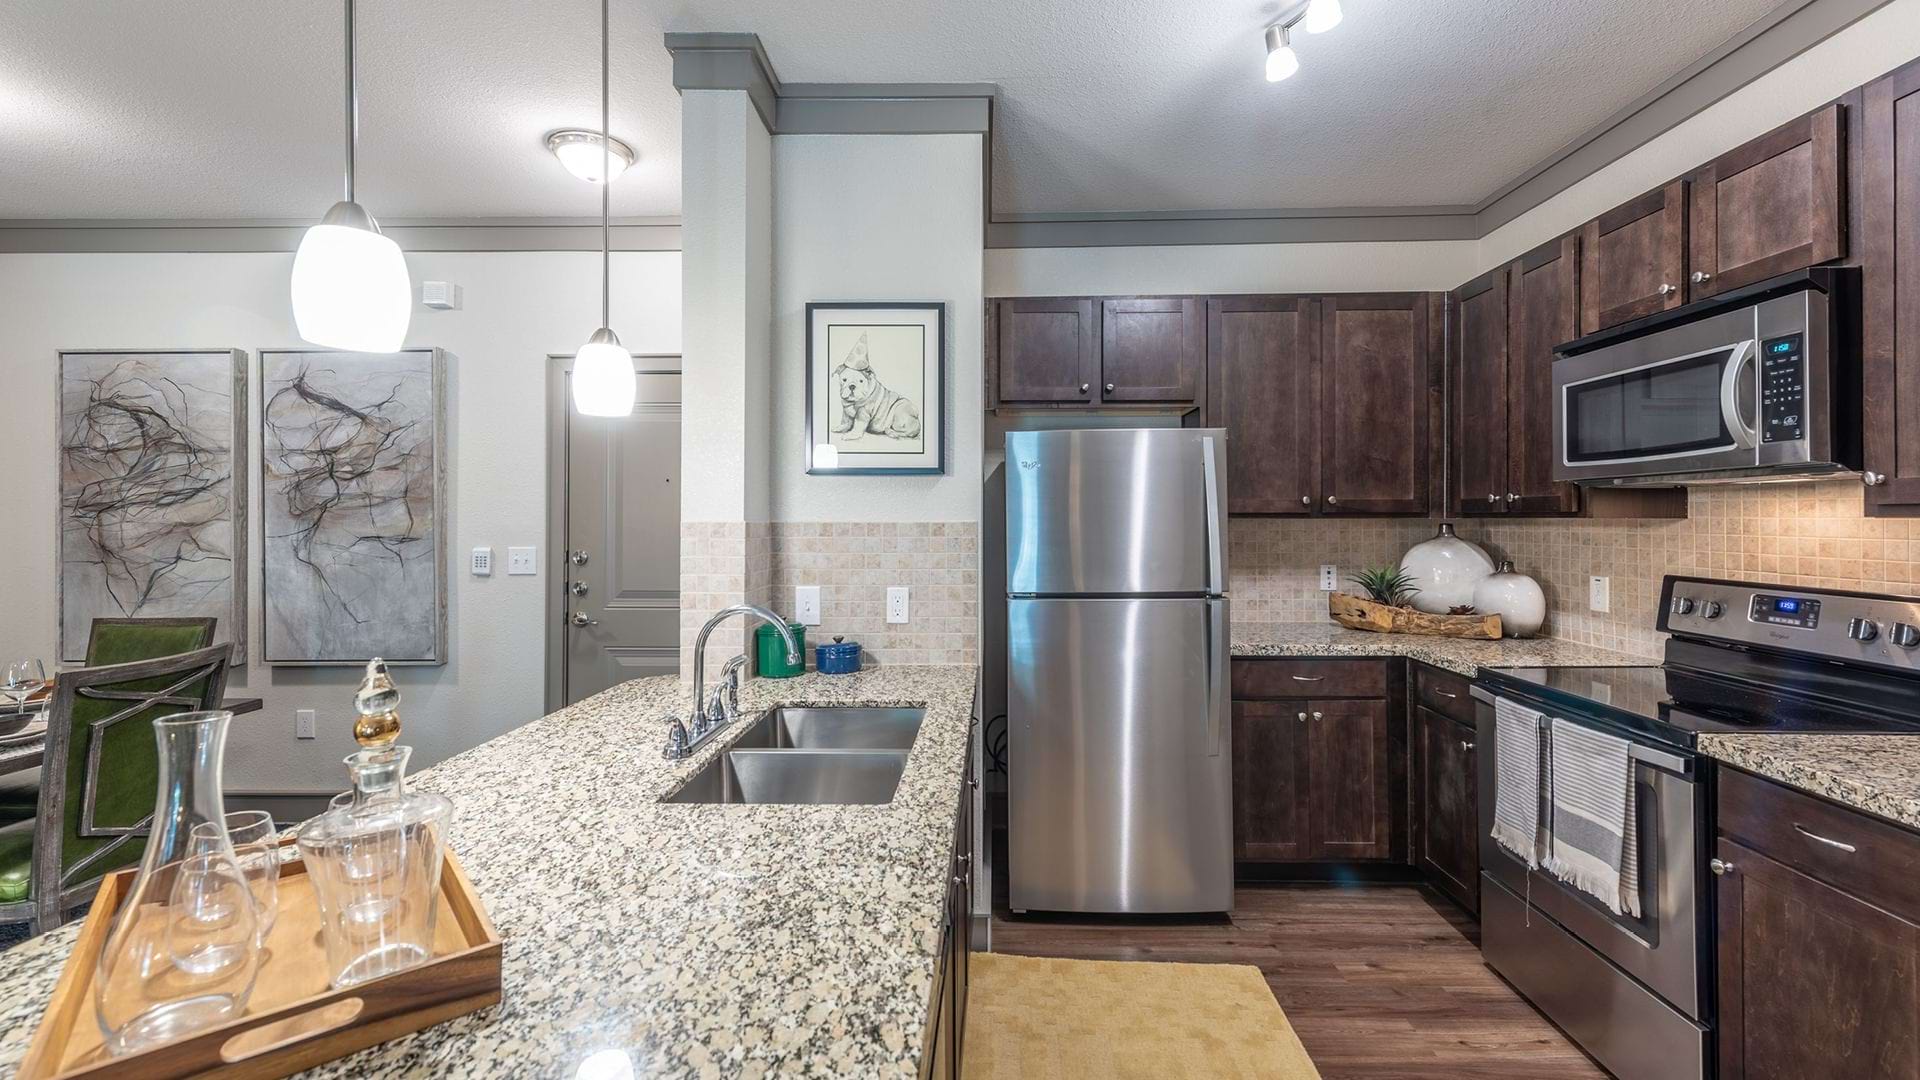 Luxury Kitchen With Modern Cabinetry And Granite Countertops At Our Apartments In Katy, TX